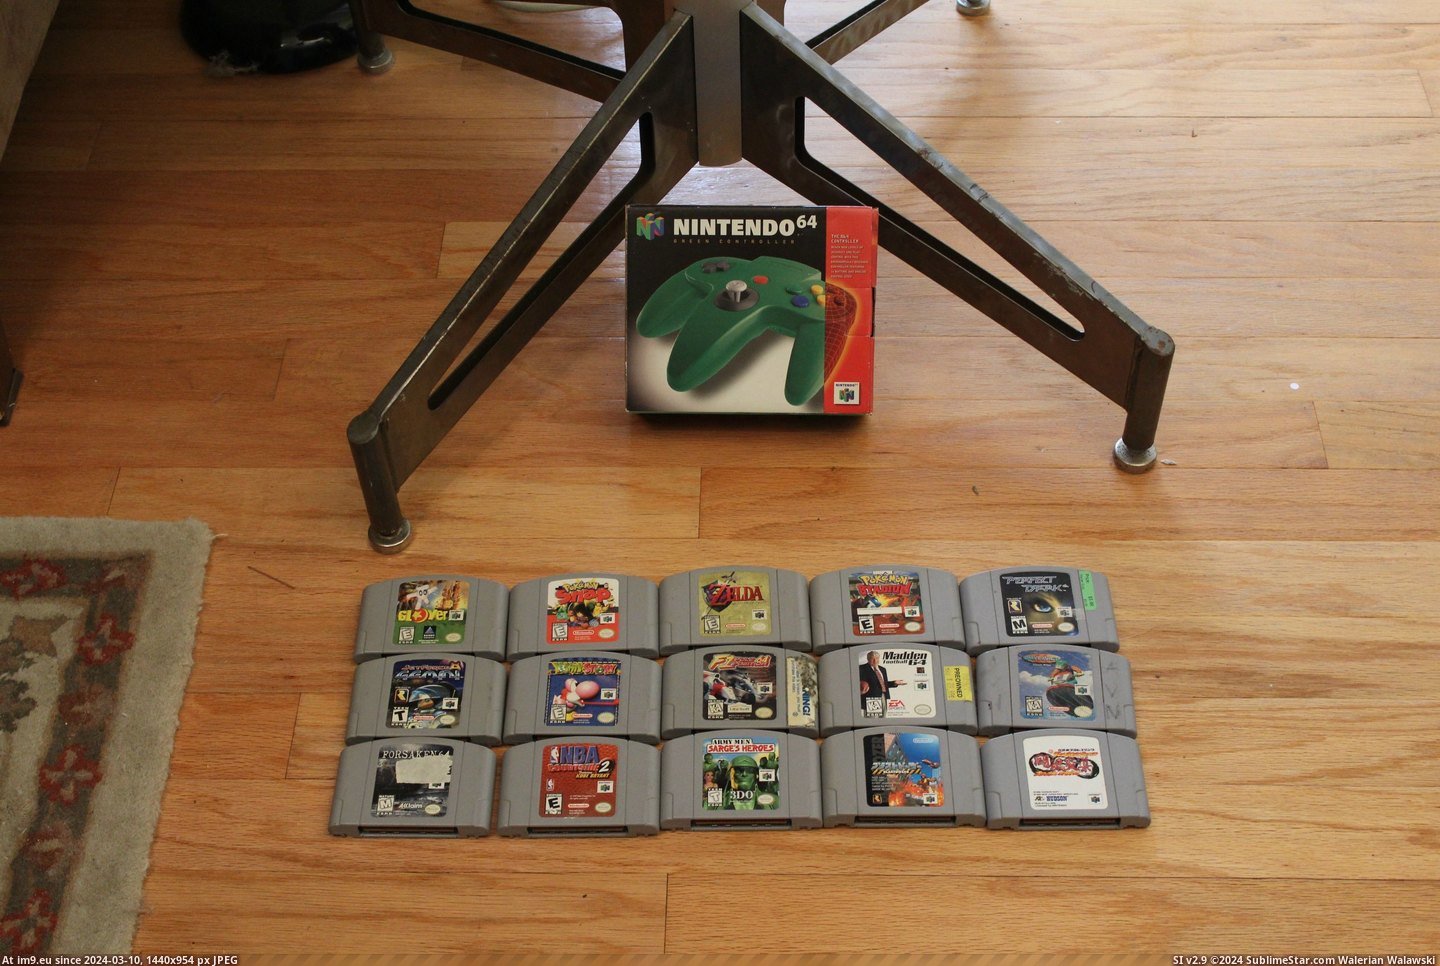 #Gaming #Year #Ago #Off #Demo #Craigslist #Unit #Rarest #Bought #Store #Own #N64 [Gaming] Bought a N64 Store Demo Unit off Craigslist 1 year ago. Probably the rarest thing I own. 6 Pic. (Obraz z album My r/GAMING favs))